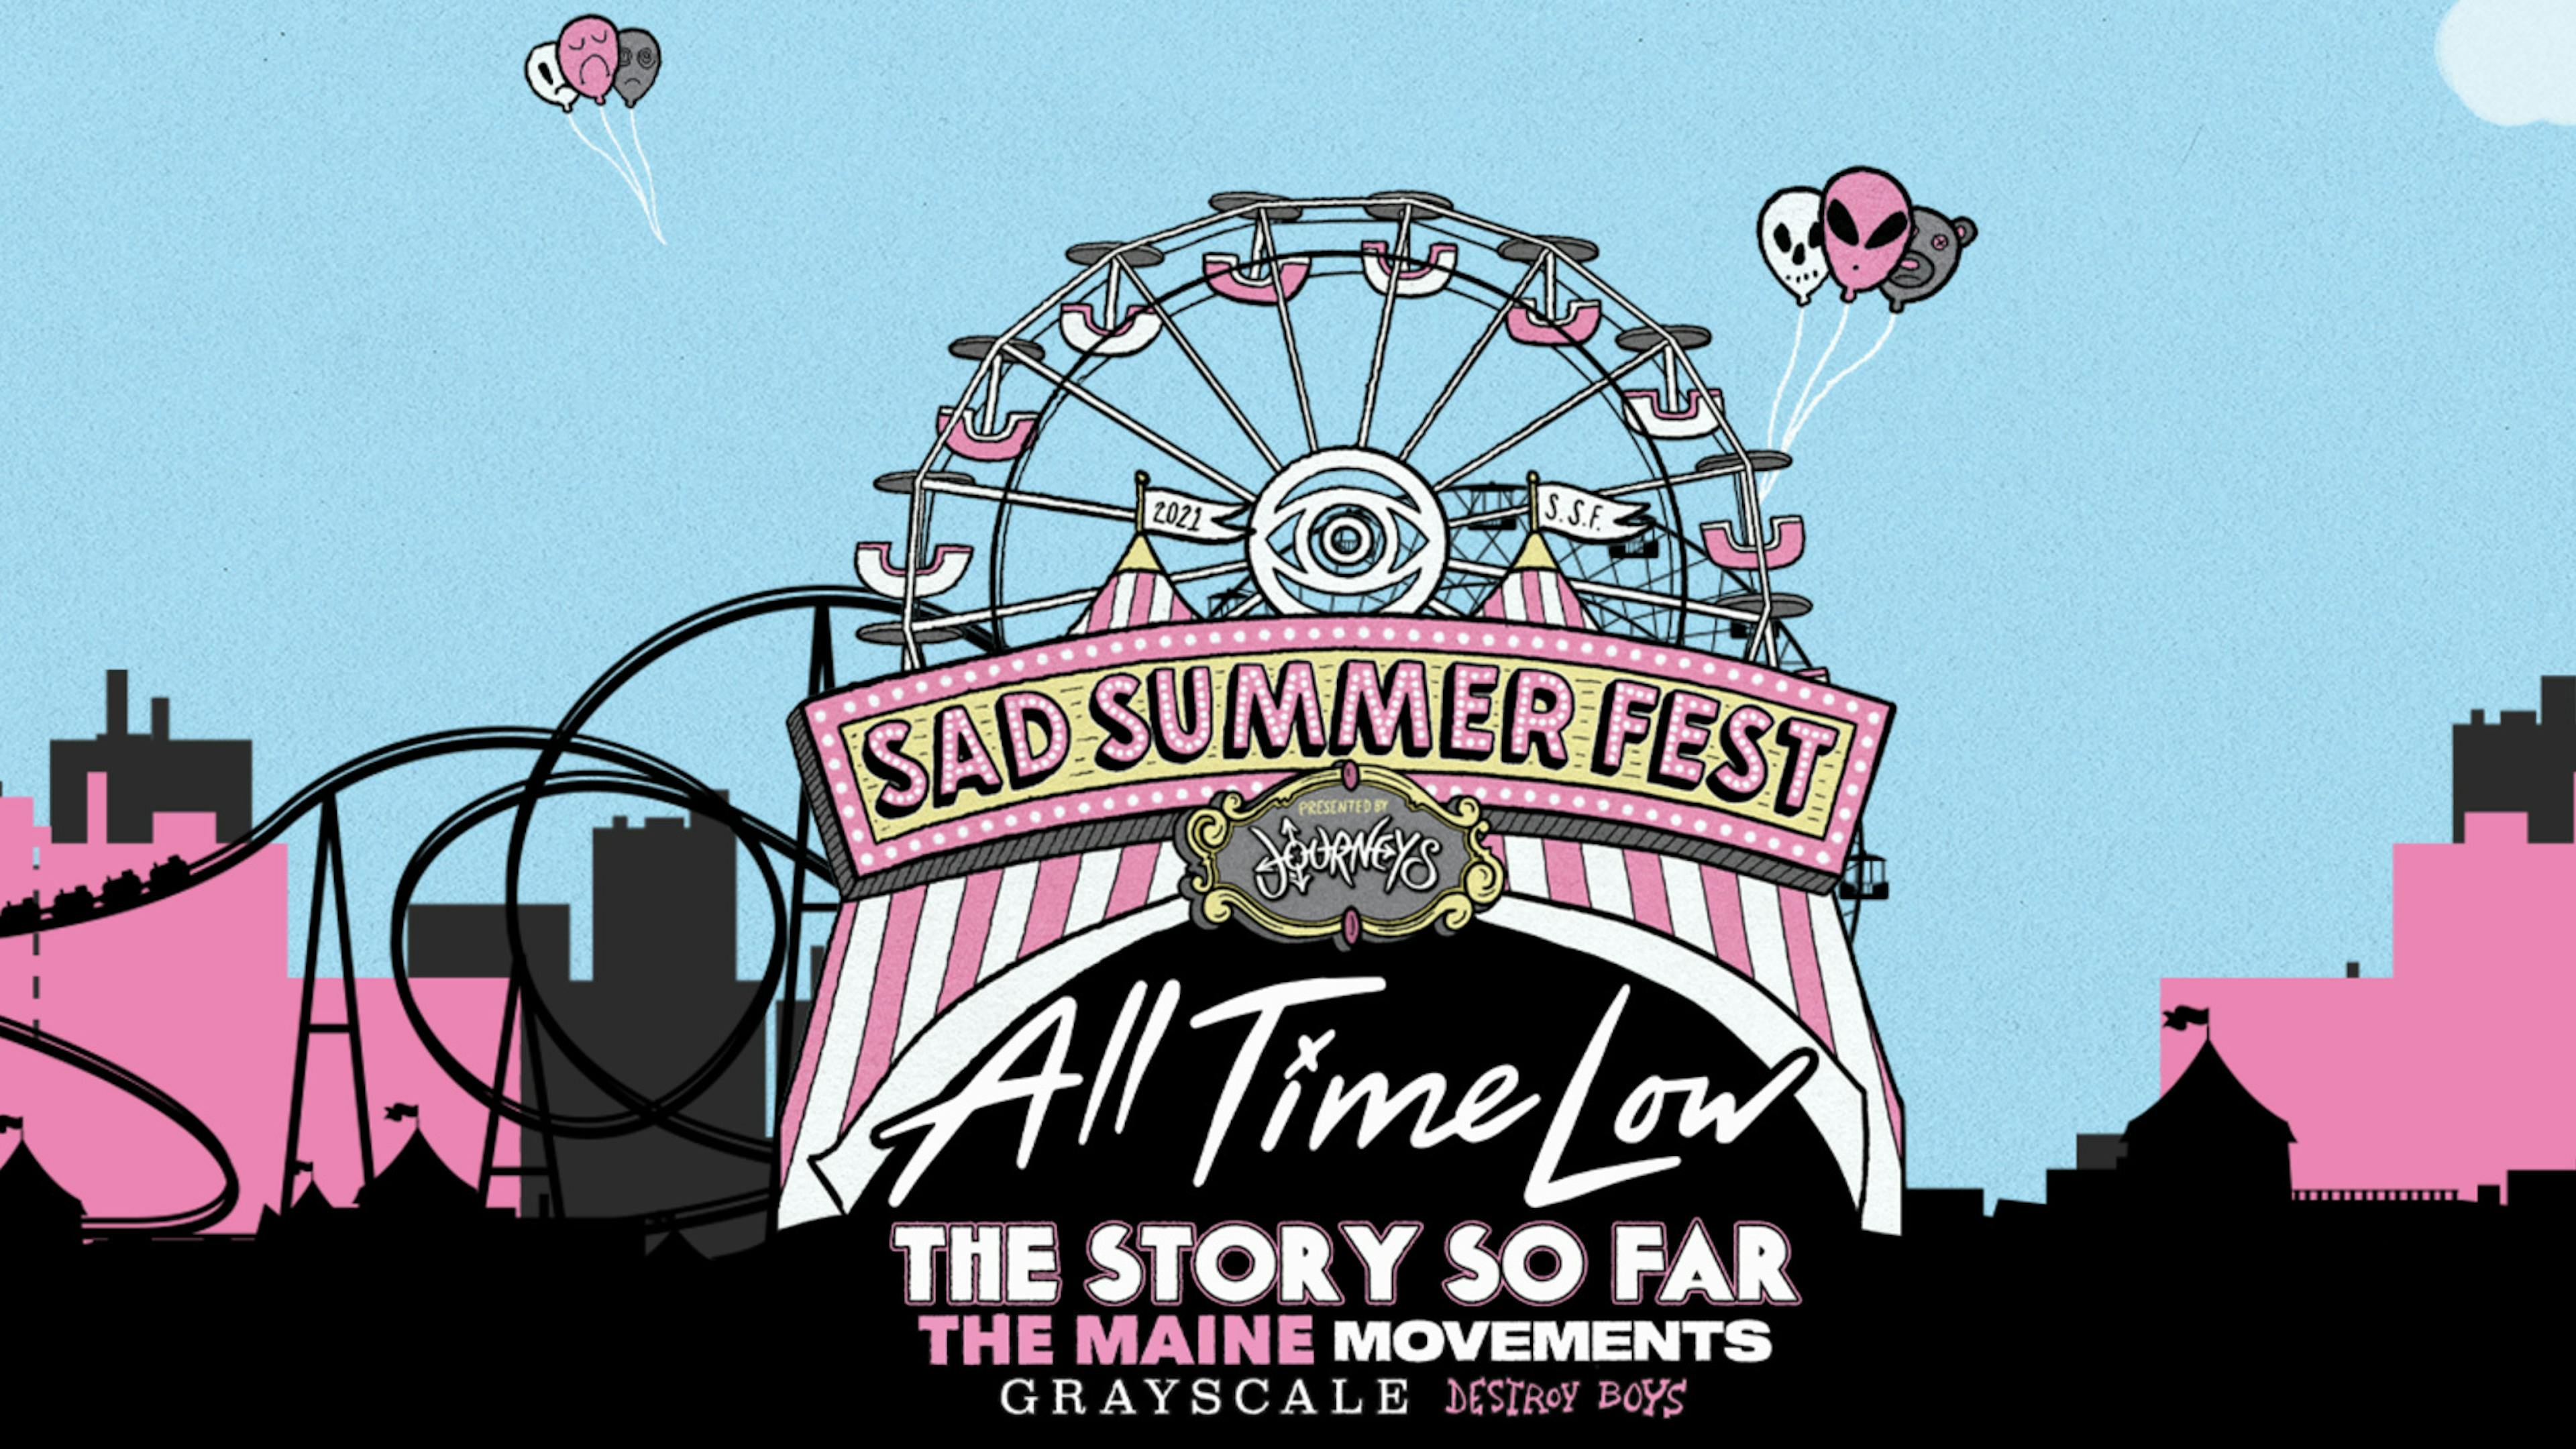 Sad Summer Fest (All Time Low, The Story So Far and more) announce rescheduled tour dates